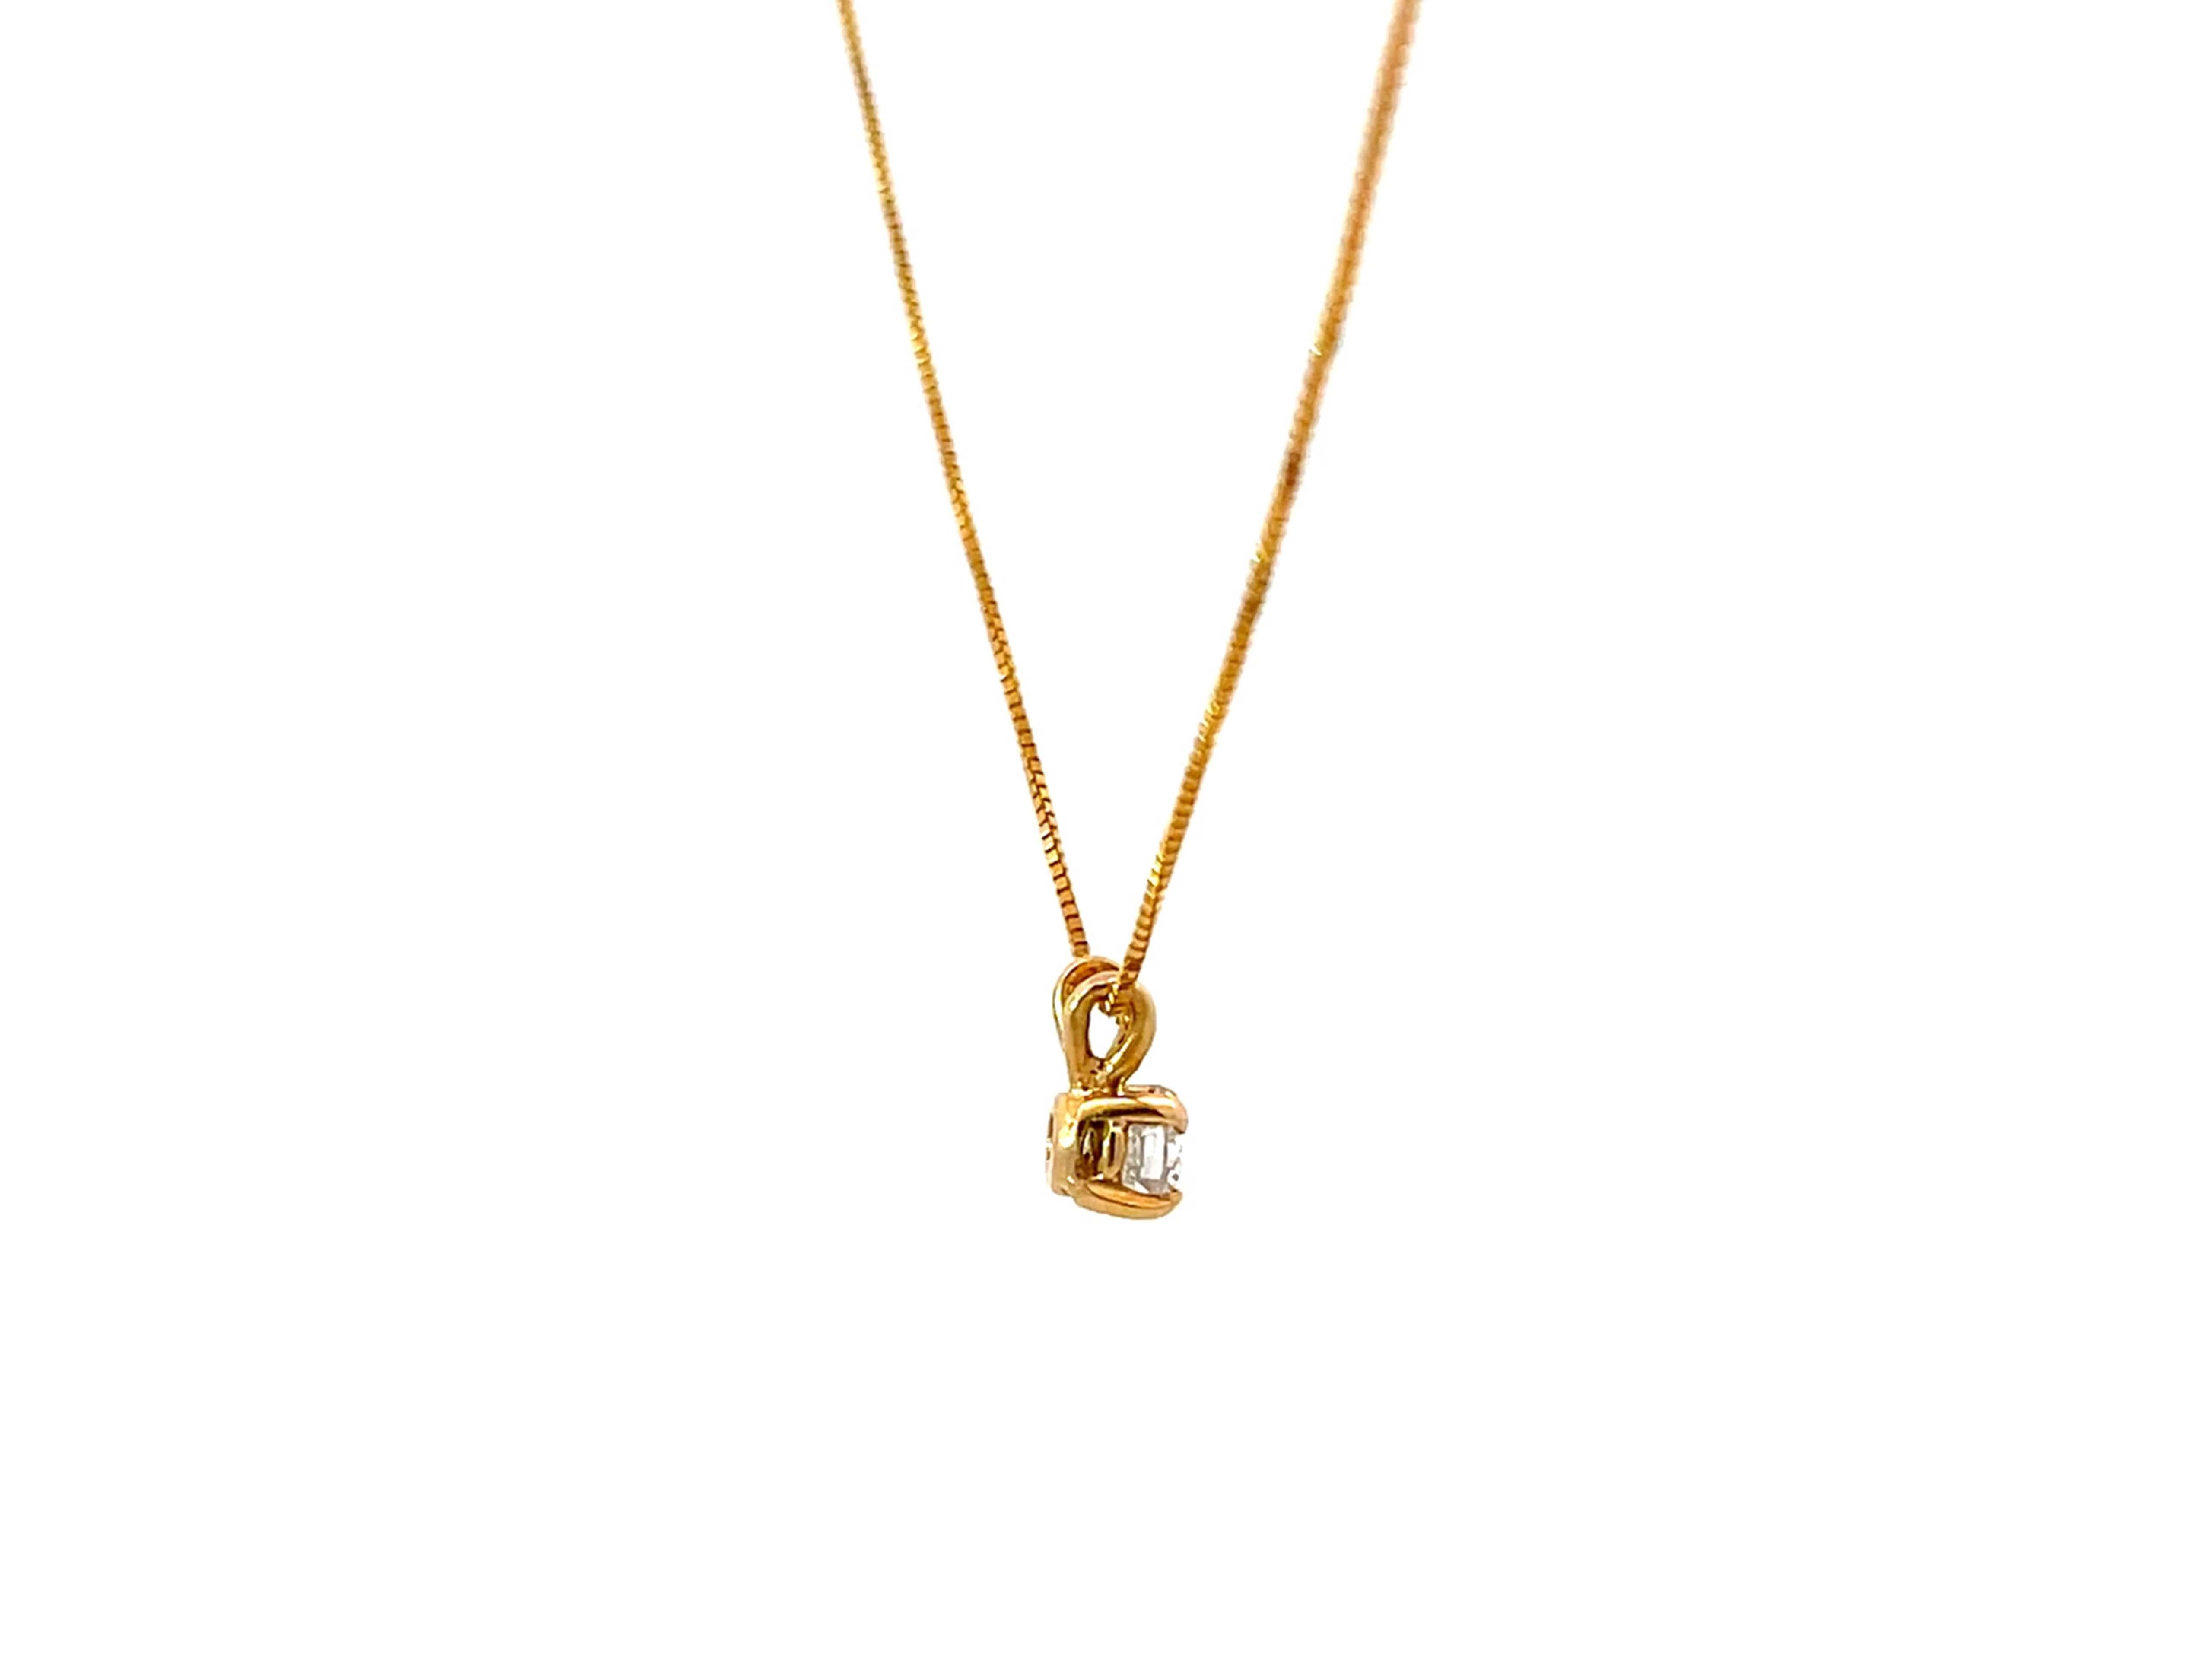 Solitaire Diamond Pendant Necklace 14k Yellow Gold In Excellent Condition For Sale In Honolulu, HI